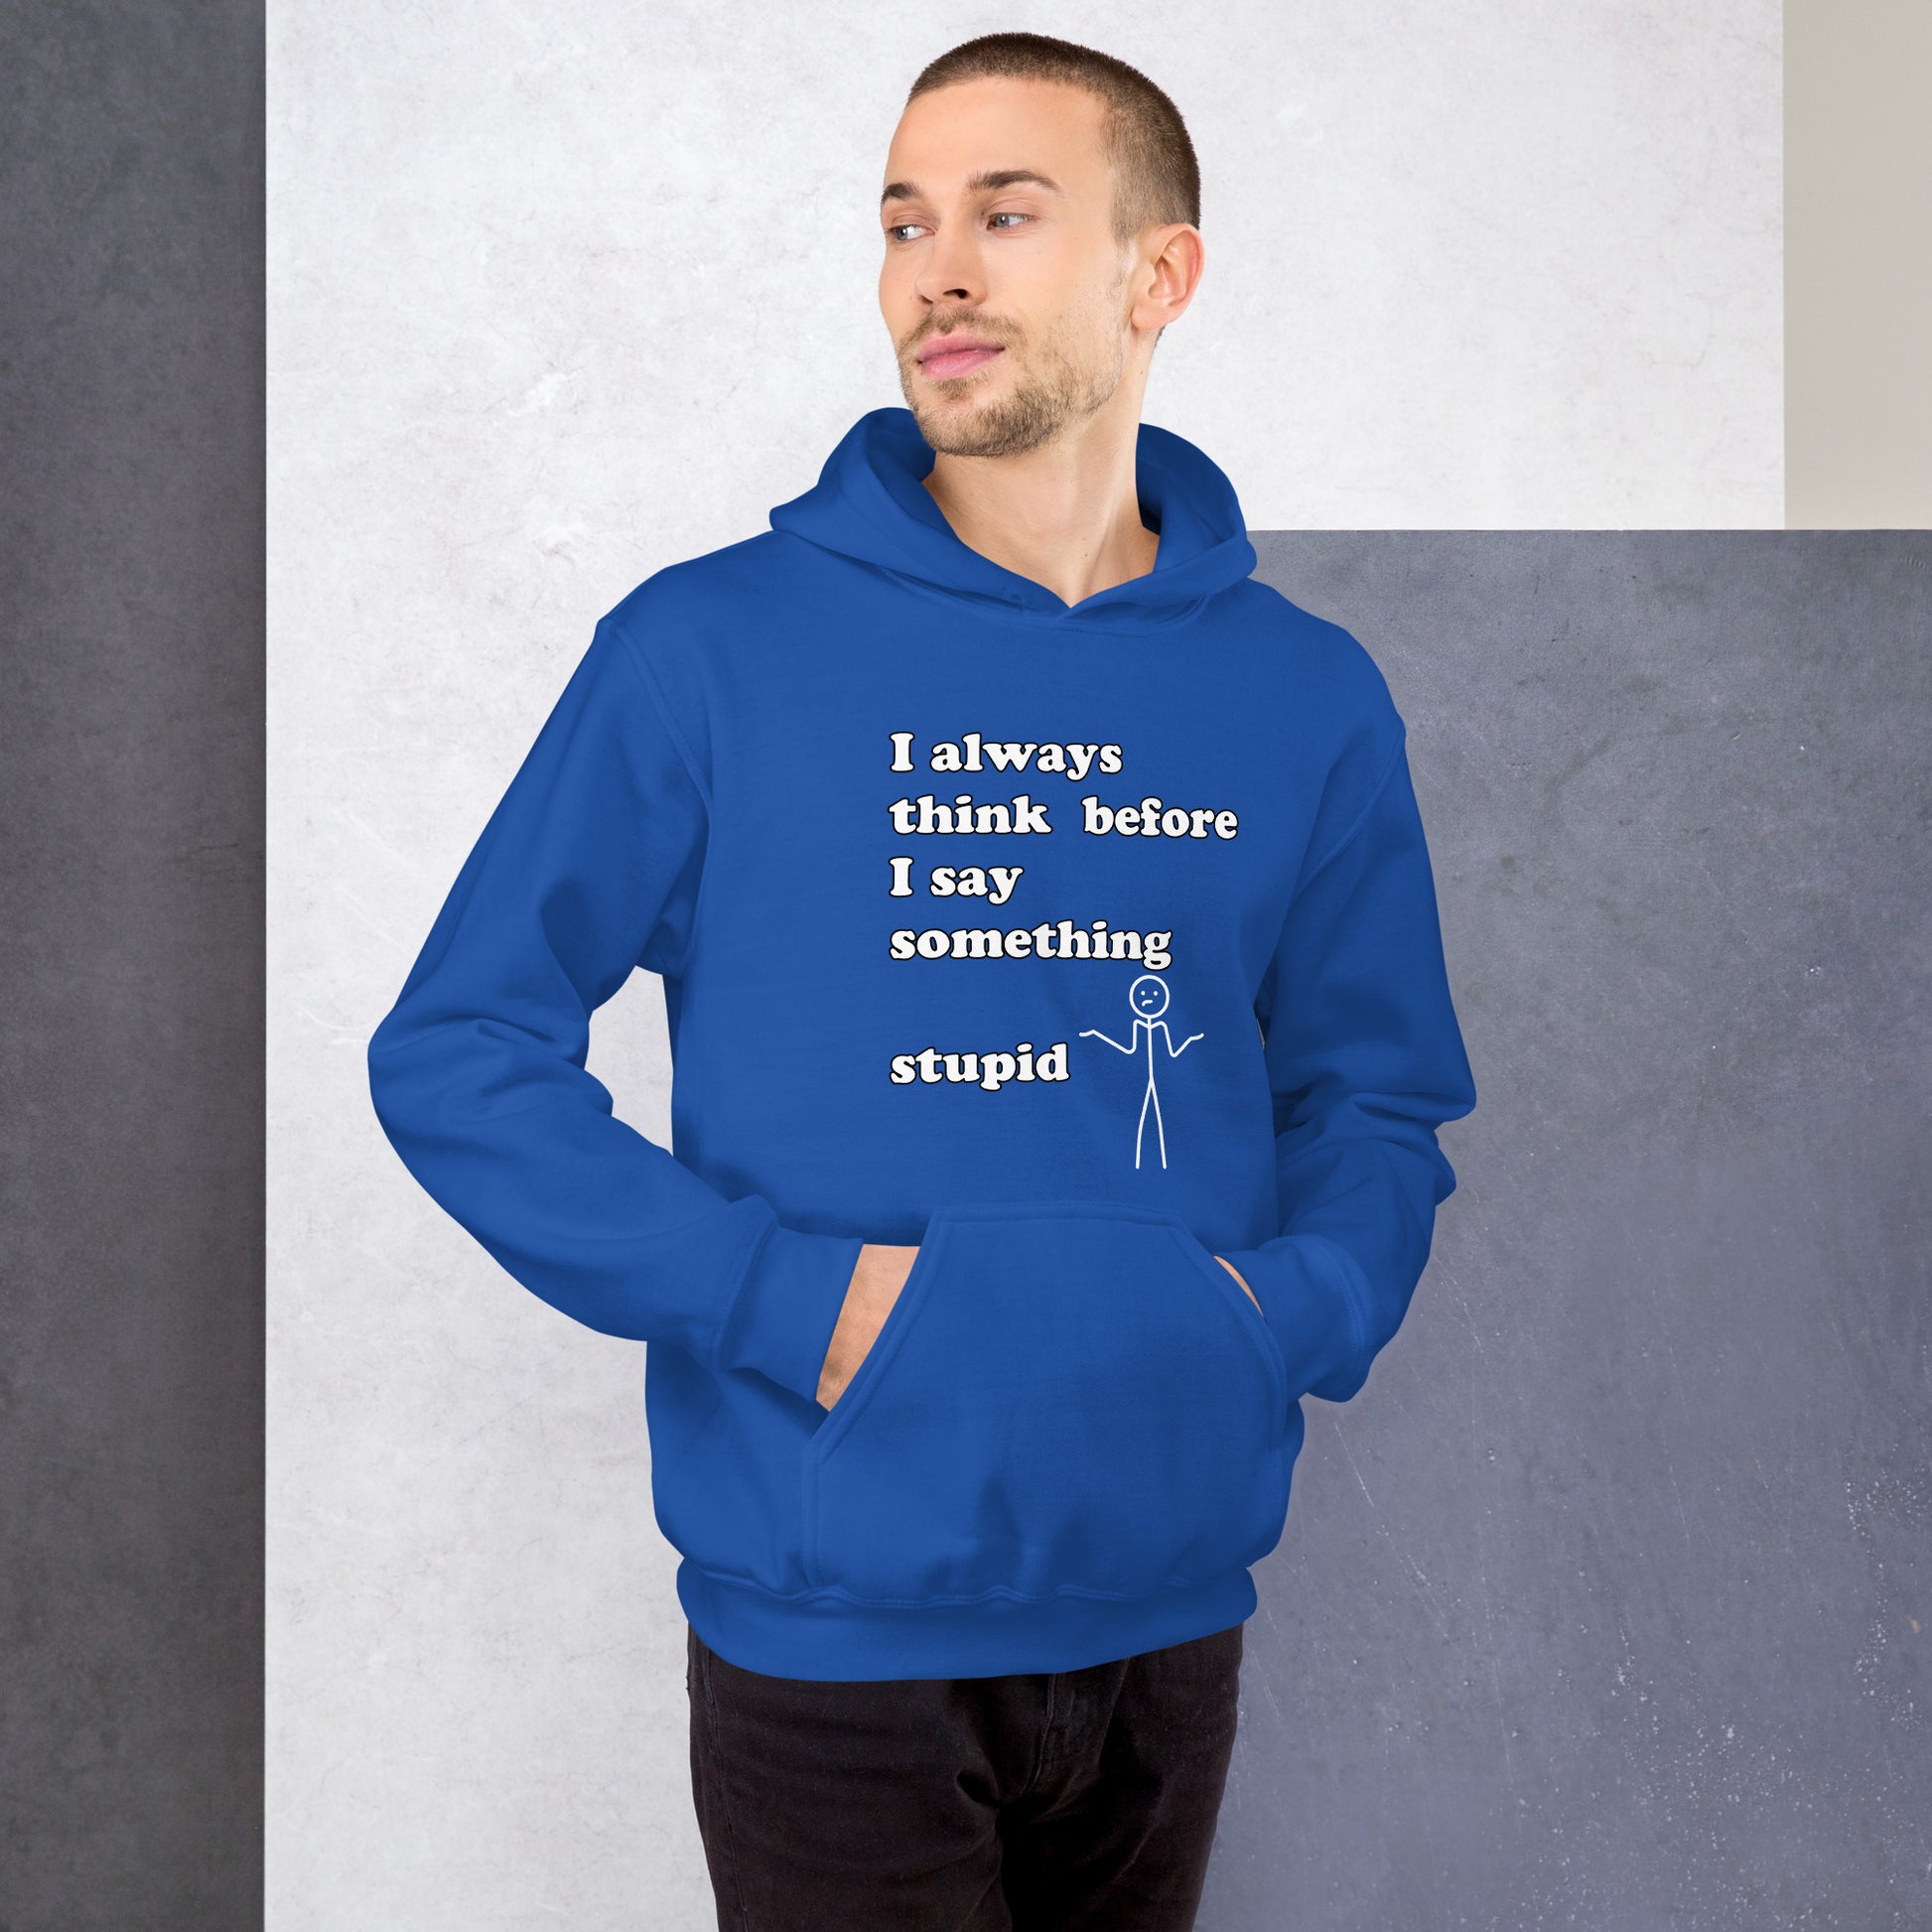 Man with royal blue hoodie with text "I always think before I say something stupid"